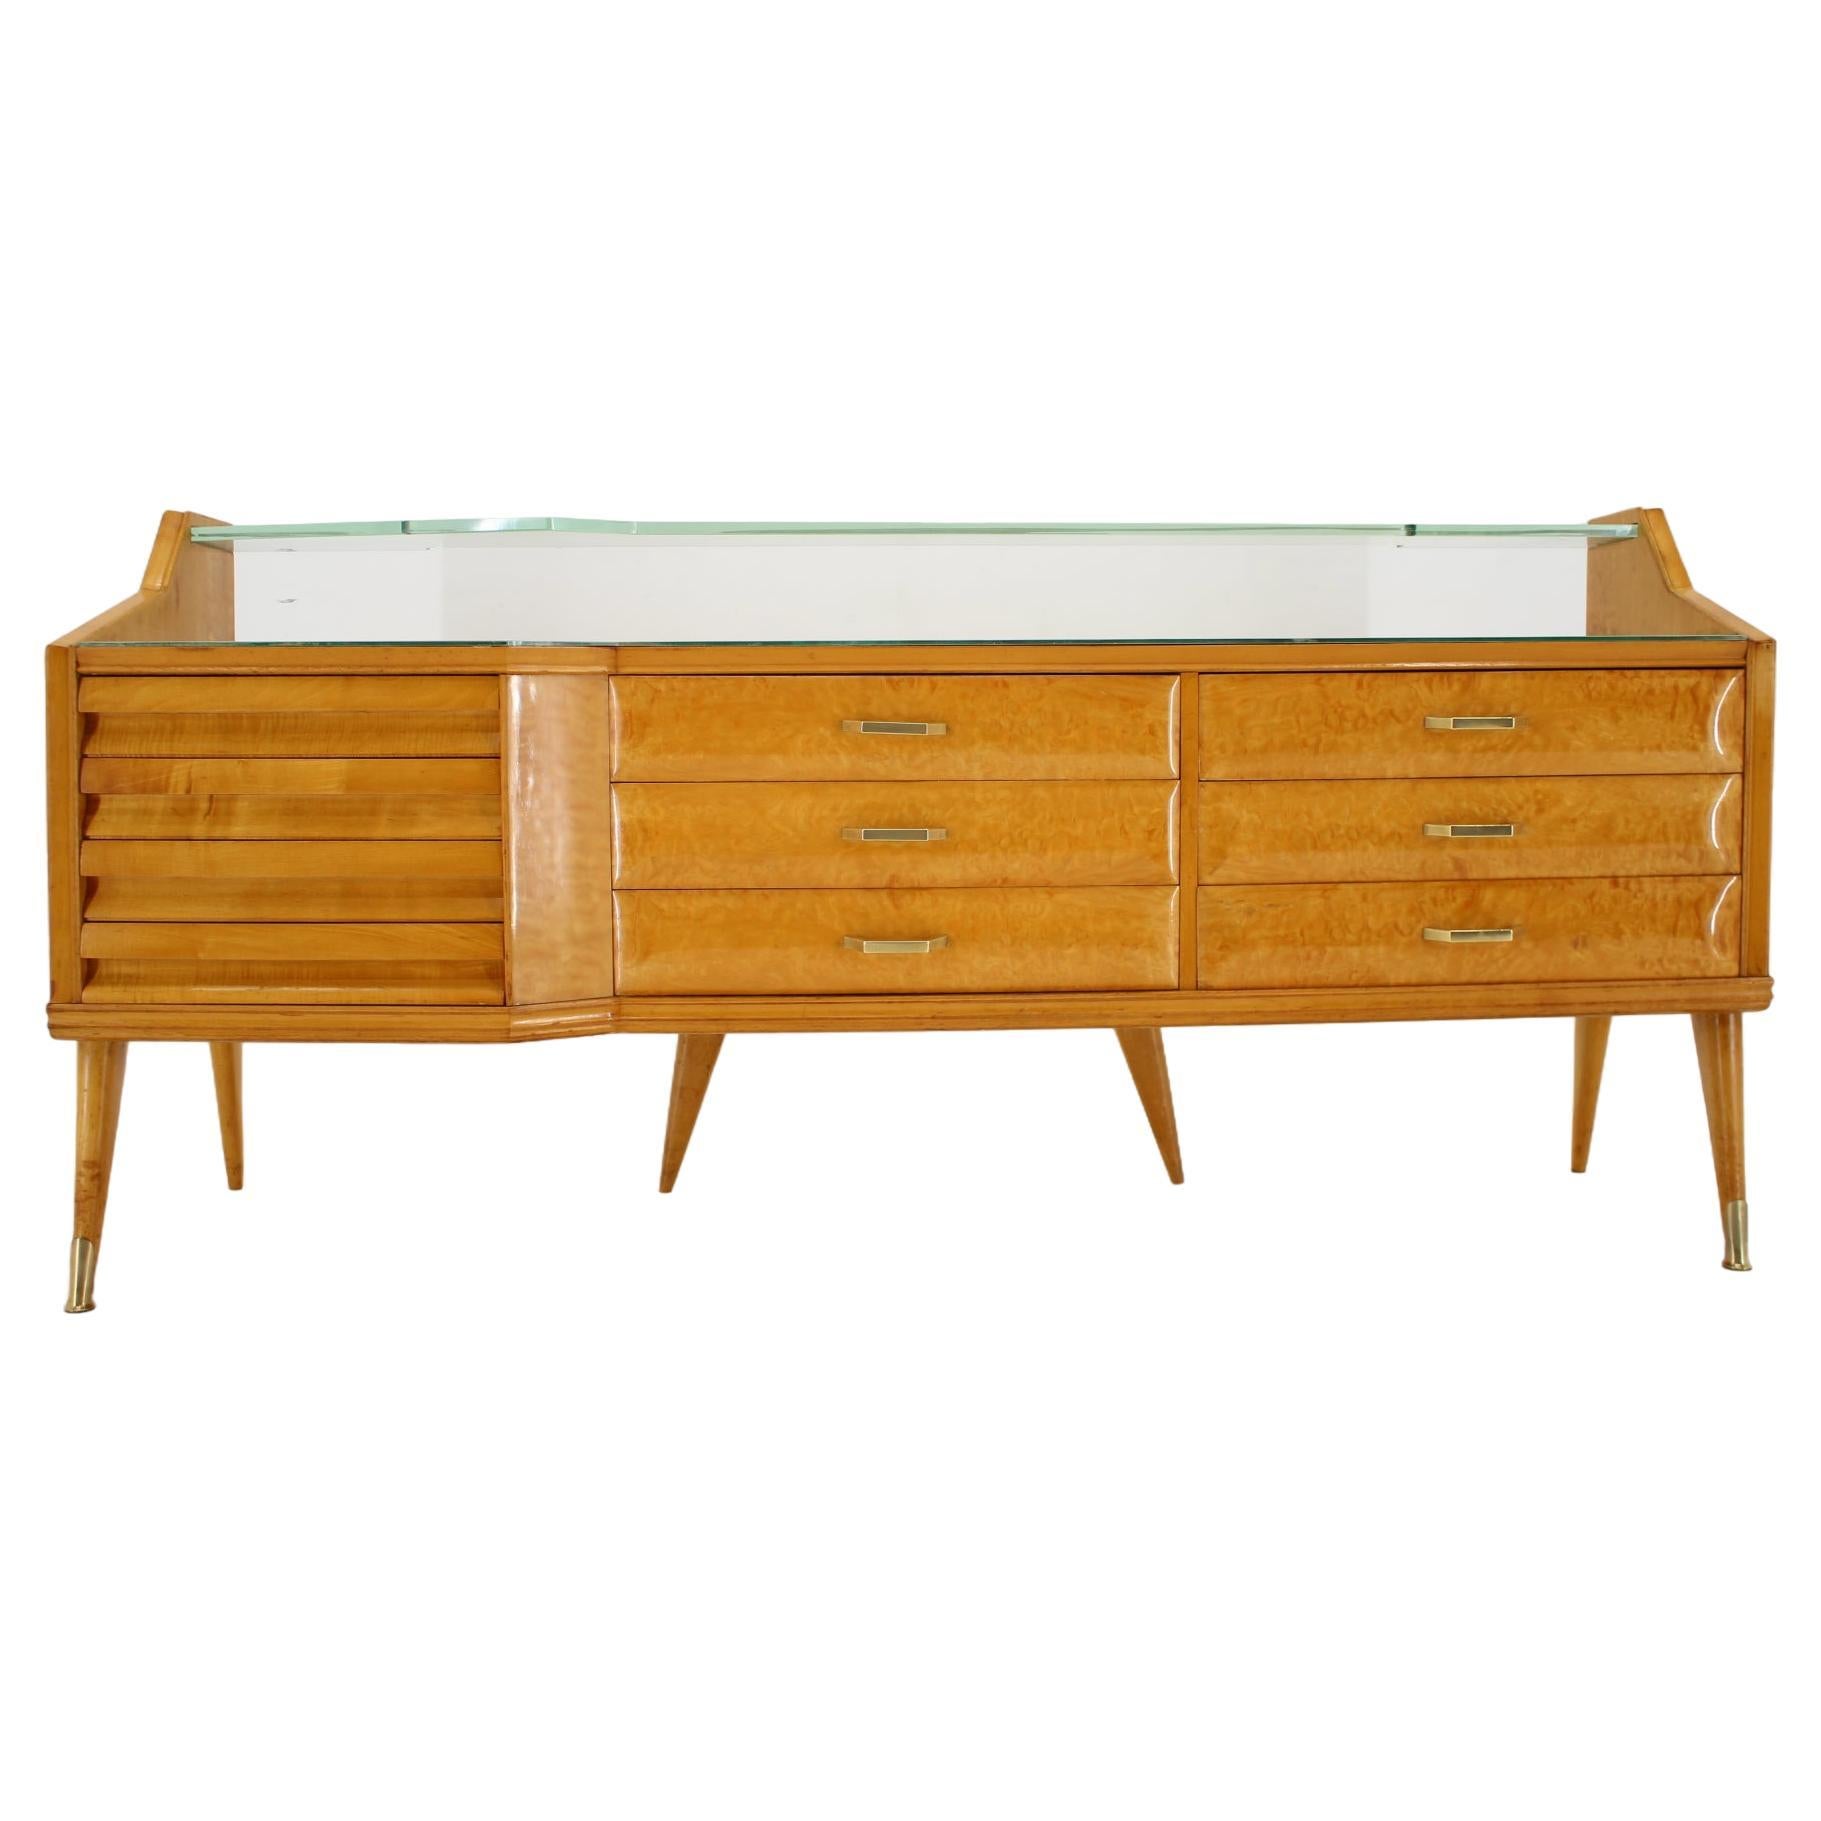 1960s Italian Sideboard/Chest of Drawers in High Gloss Finish with Glass Top and